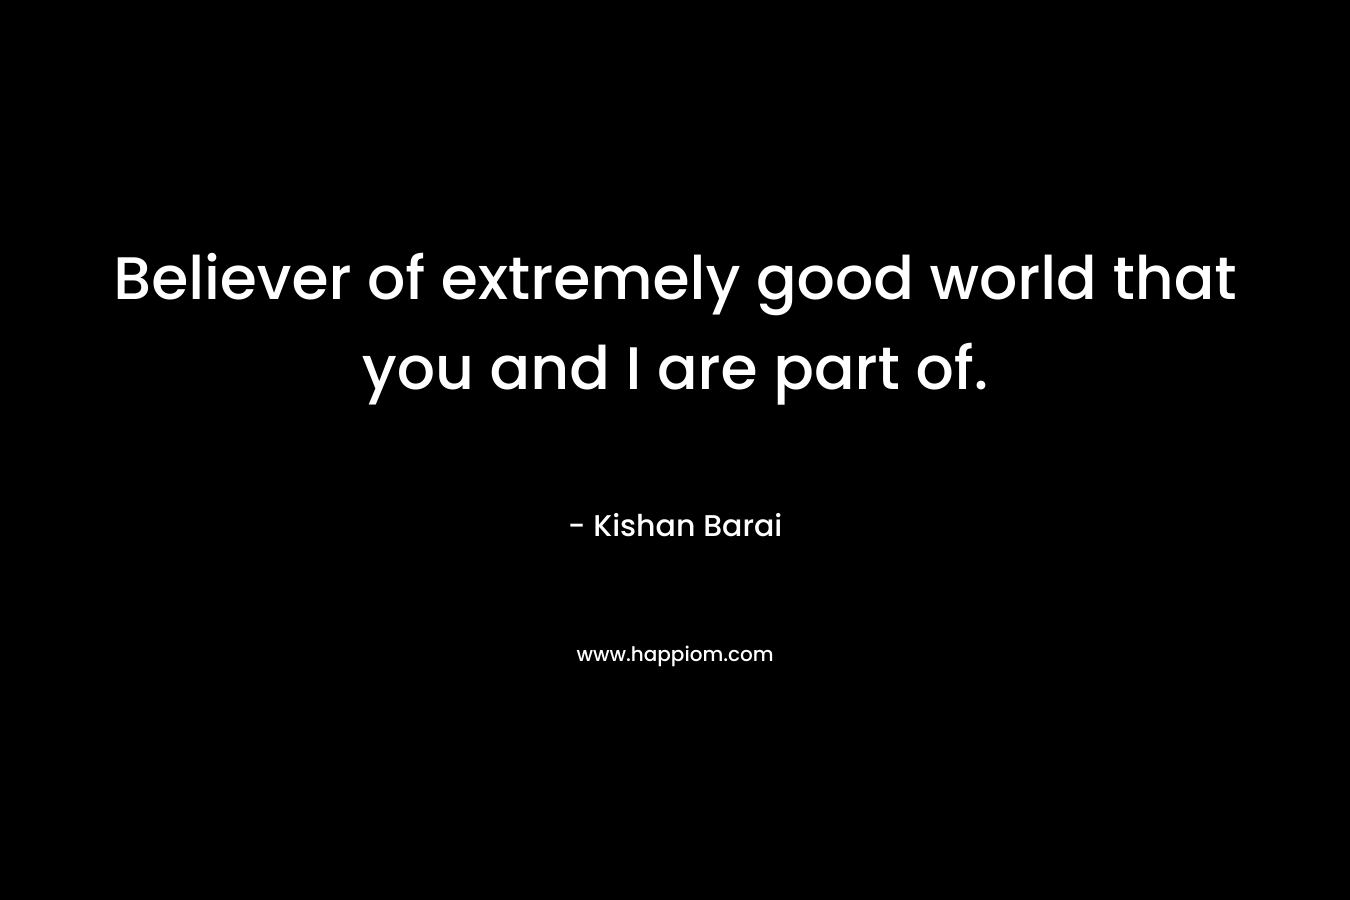 Believer of extremely good world that you and I are part of.